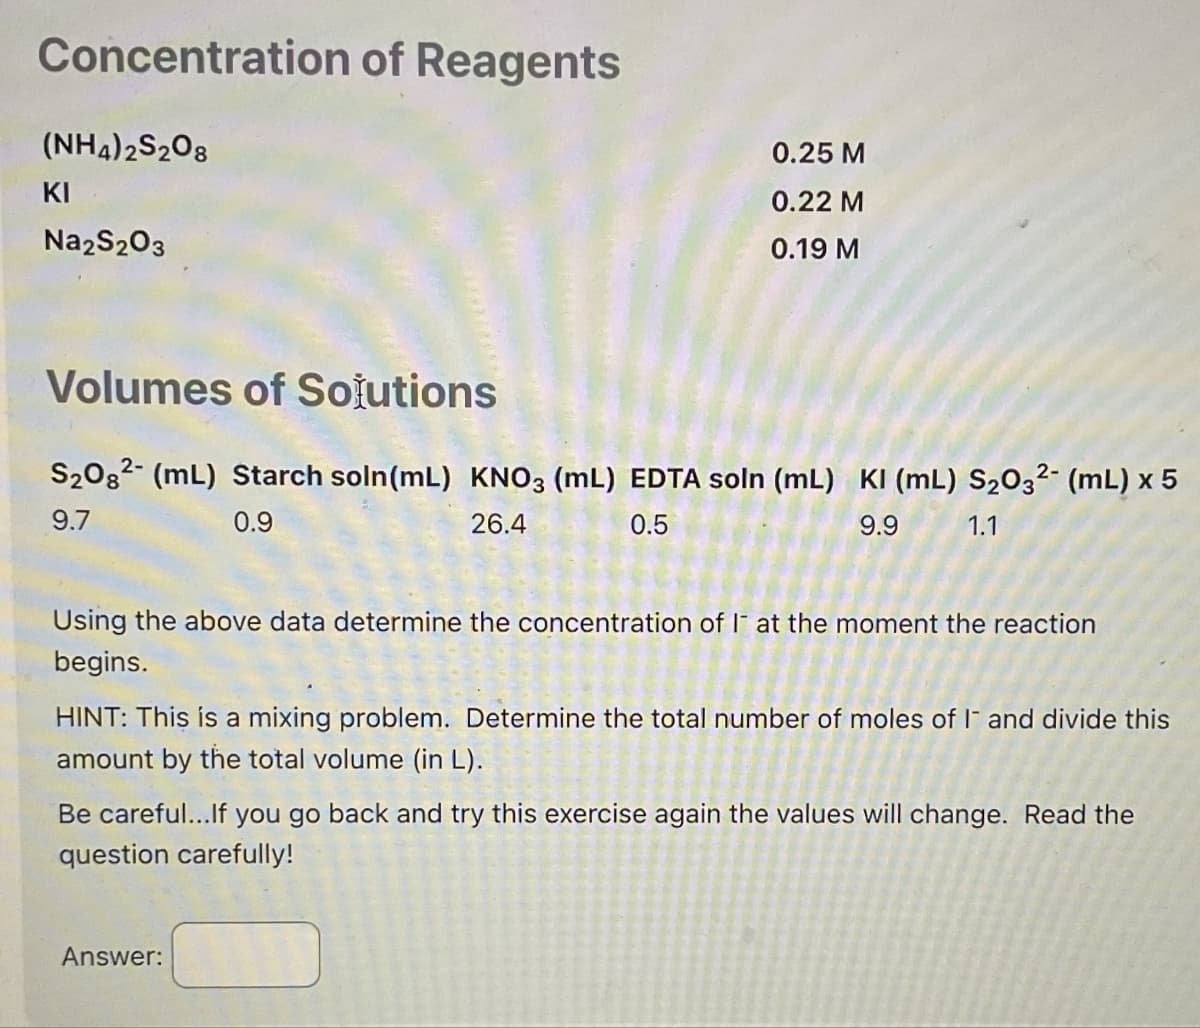 Concentration of Reagents
(NH4)2S2O8
KI
Na2S2O3
0.25 M
0.22 M
0.19 M
Volumes of Solutions
S₂082 (mL) Starch soln (mL) KNO3 (mL) EDTA soln (mL) KI (mL) S₂O32- (mL) x 5
9.7
0.9
26.4
0.5
9.9
1.1
Using the above data determine the concentration of I at the moment the reaction
begins.
HINT: This is a mixing problem. Determine the total number of moles of I and divide this
amount by the total volume (in L).
Be careful... If you go back and try this exercise again the values will change. Read the
question carefully!
Answer: